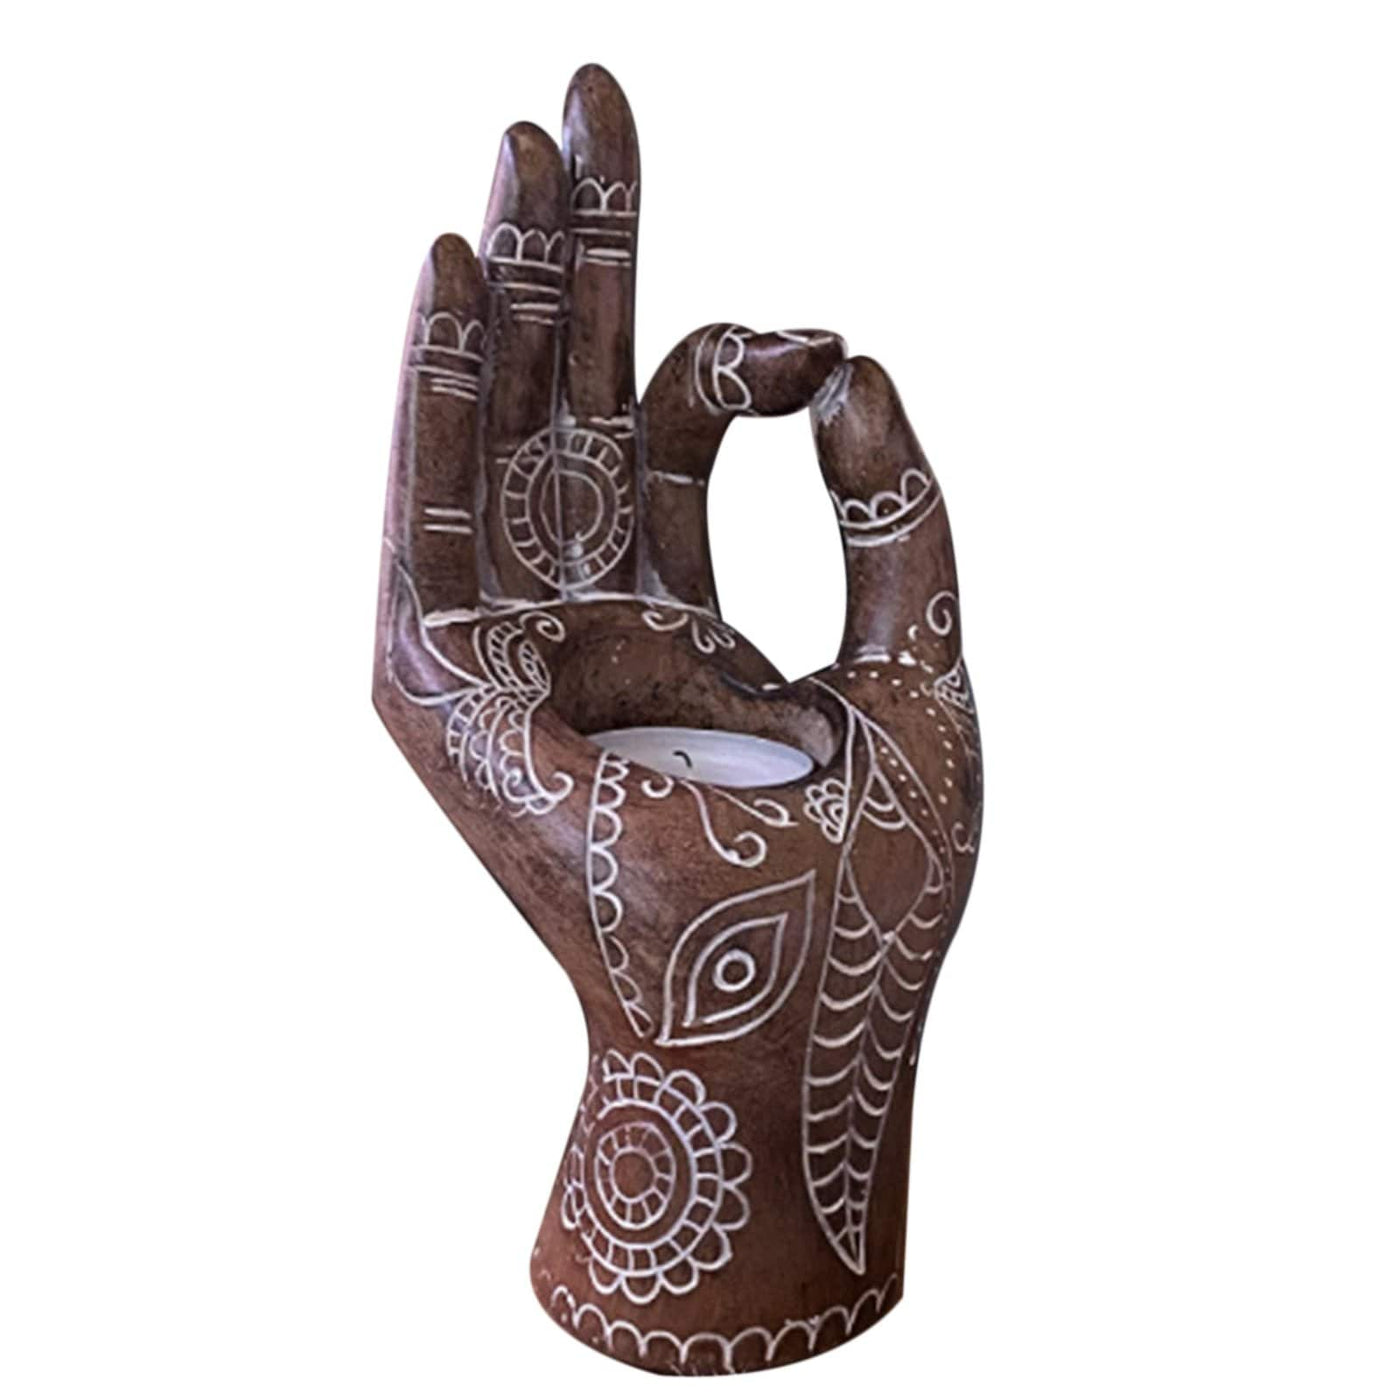 wickedafstore Buddha's Hand Shaped Candle Holder